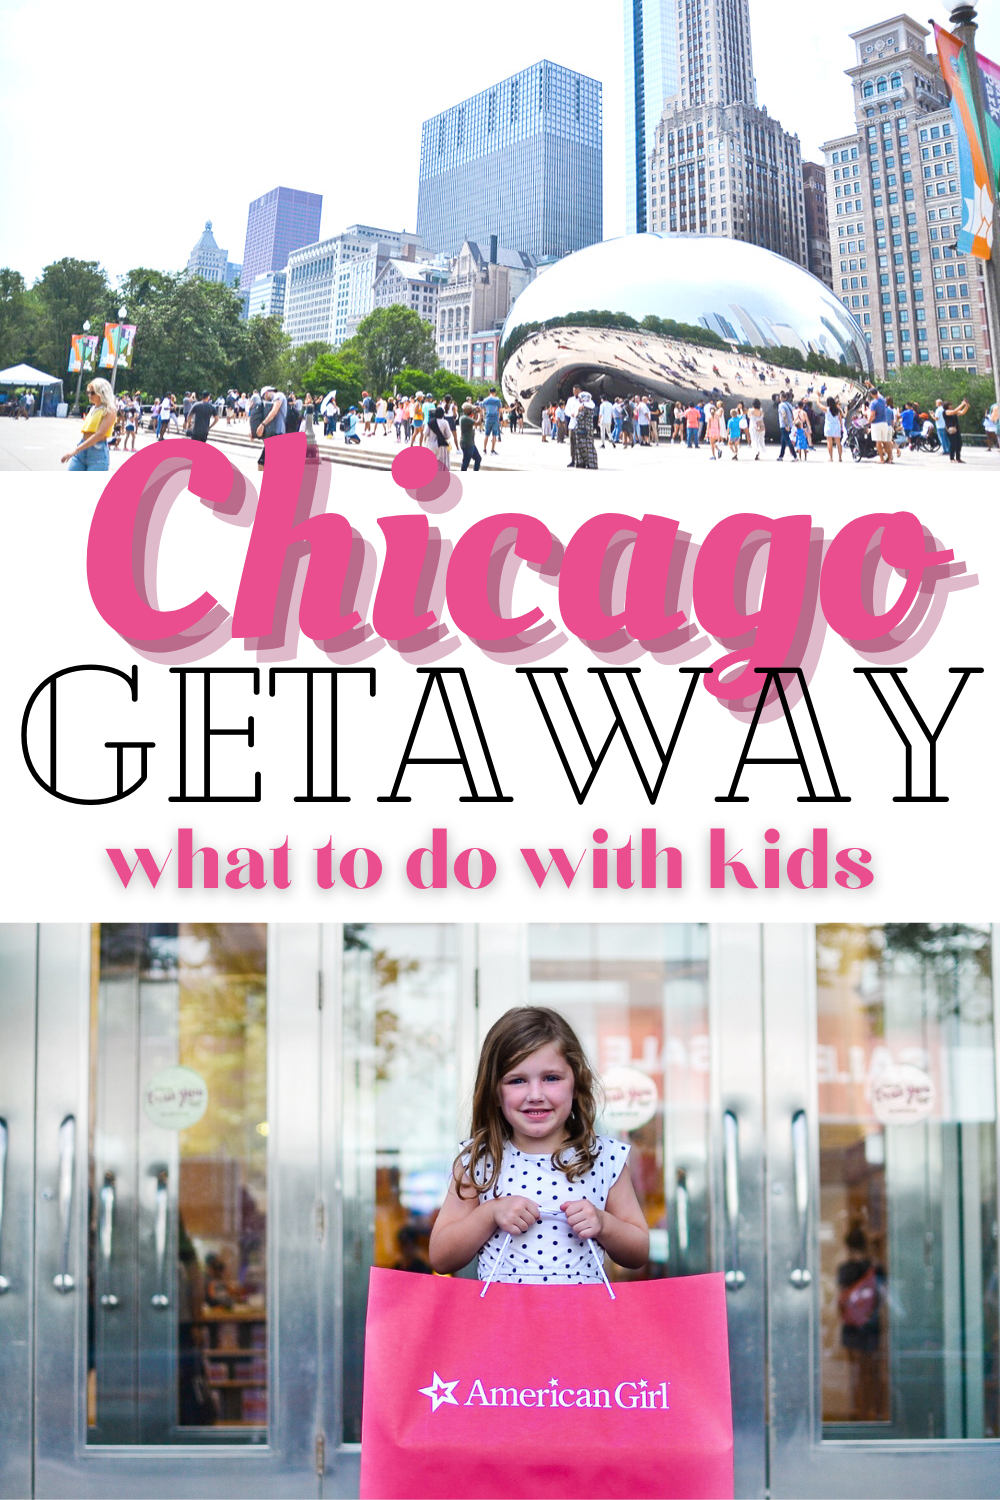 Chicago Getaway what to do with kids.png